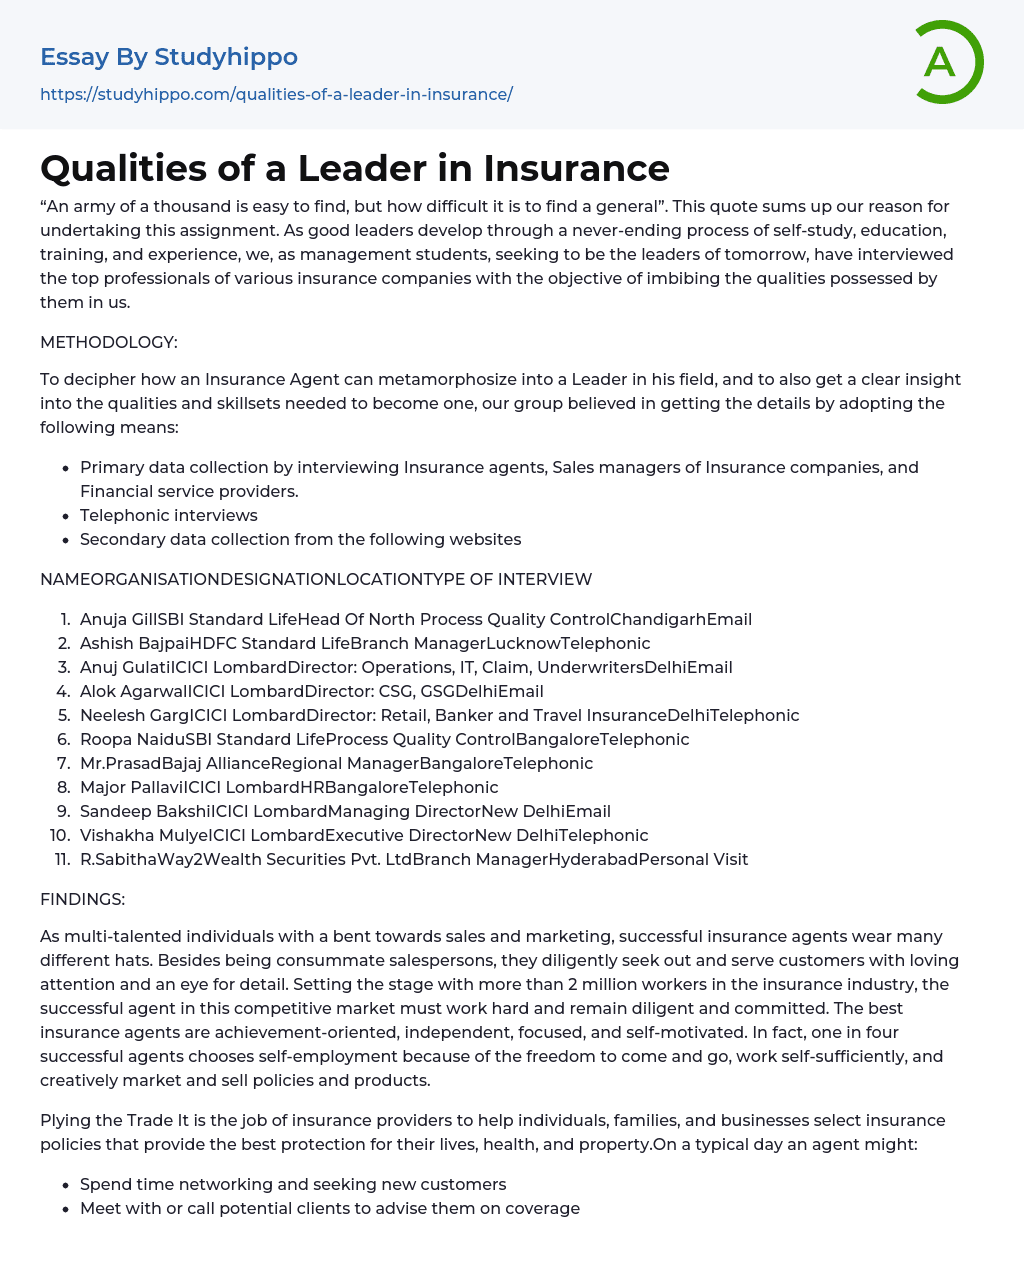 Qualities of a Leader in Insurance Essay Example